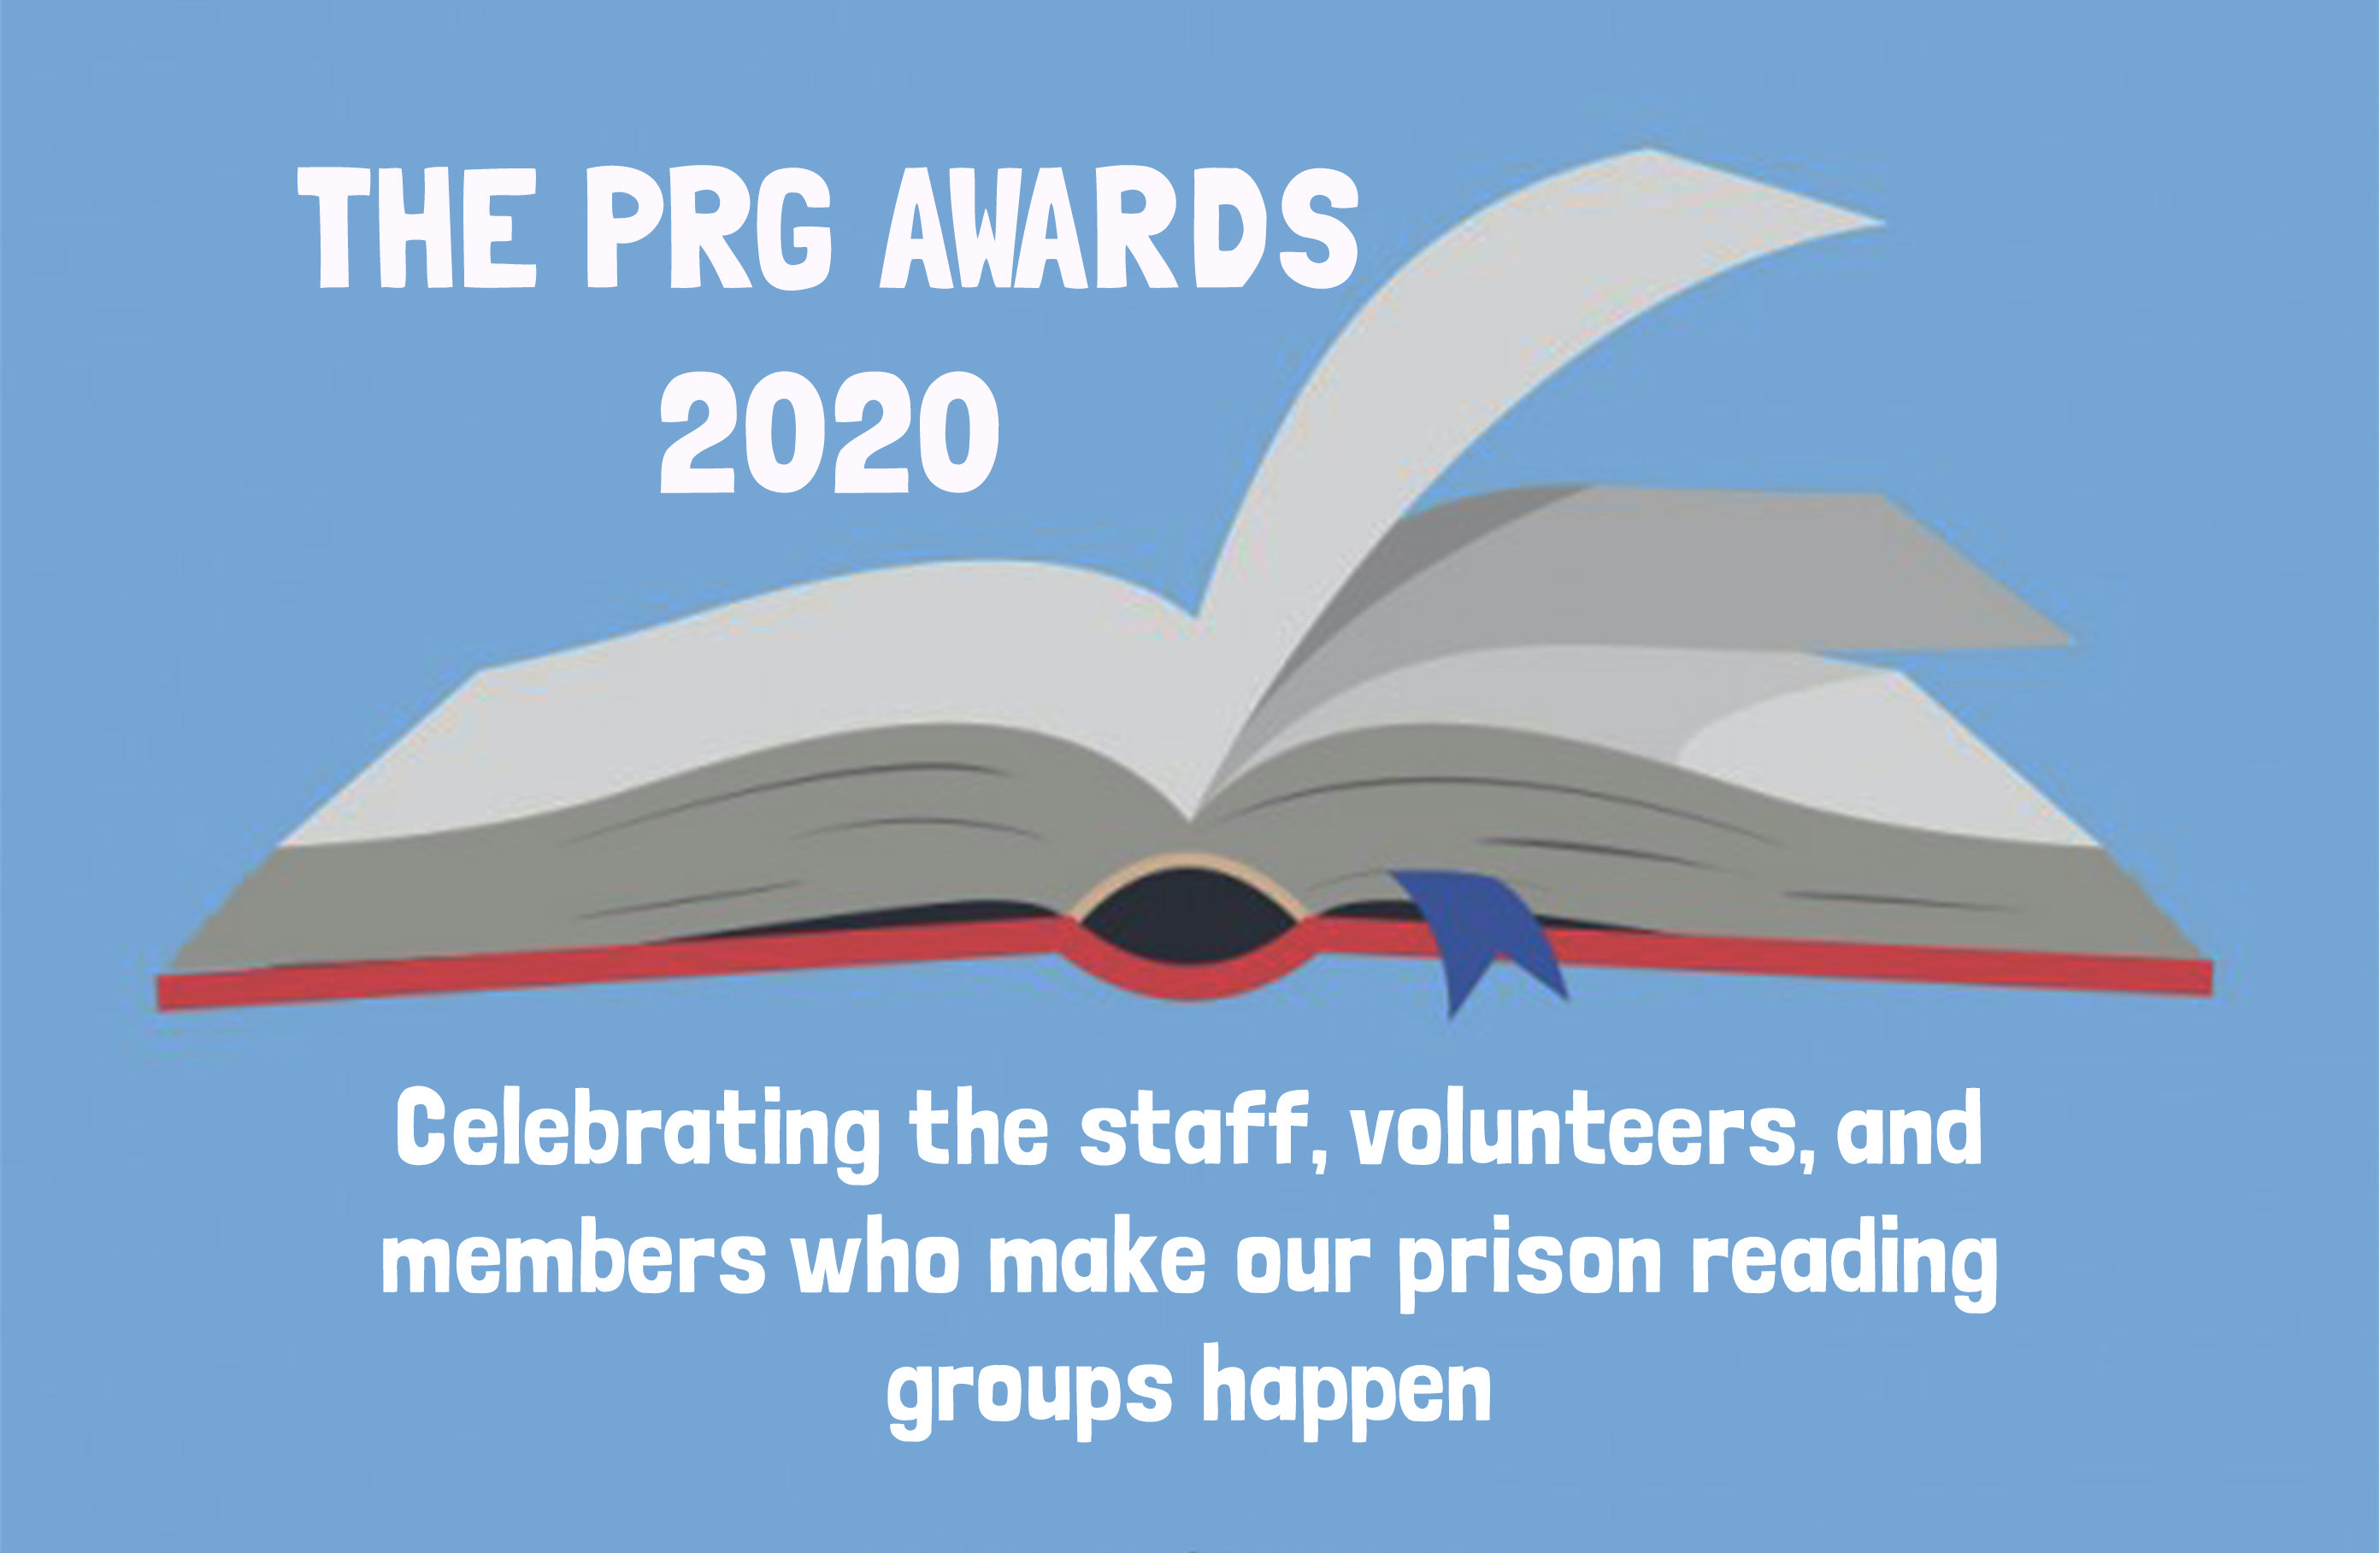 The PRG Awards 2020